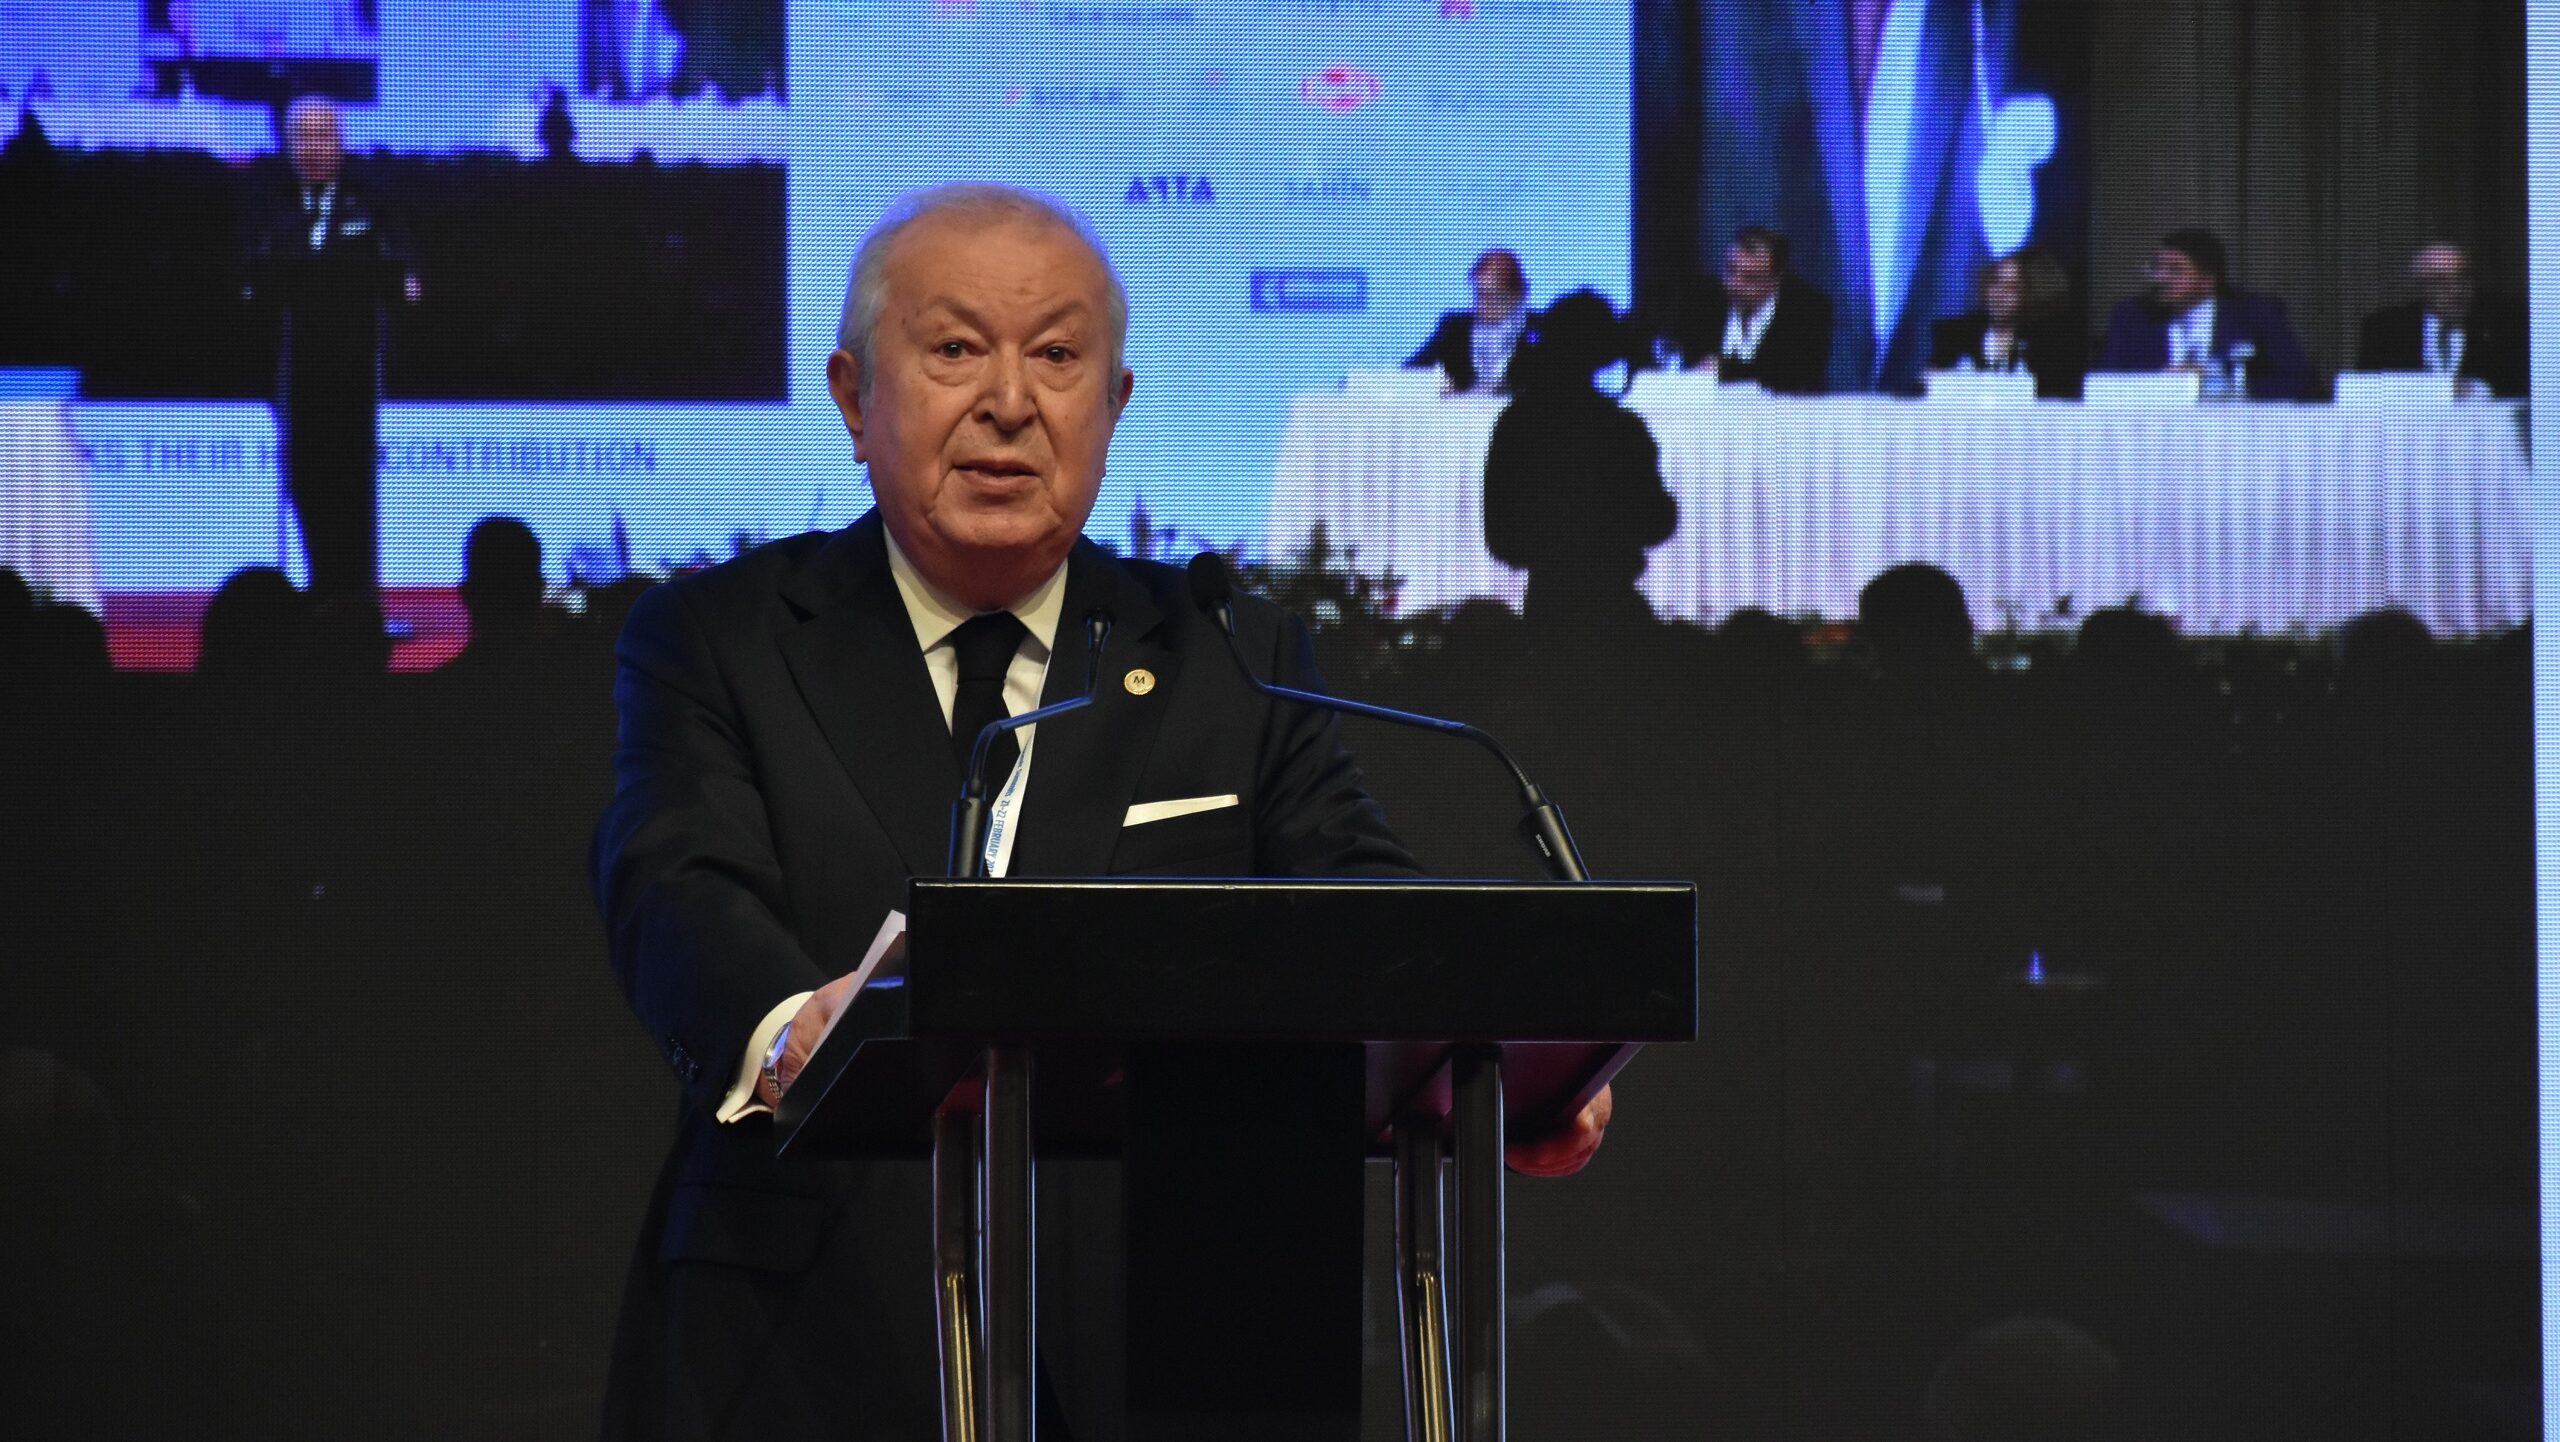 Istanbul Hosts 27th Eurasian Economic Summit To Forge Path From Crisis to Stability